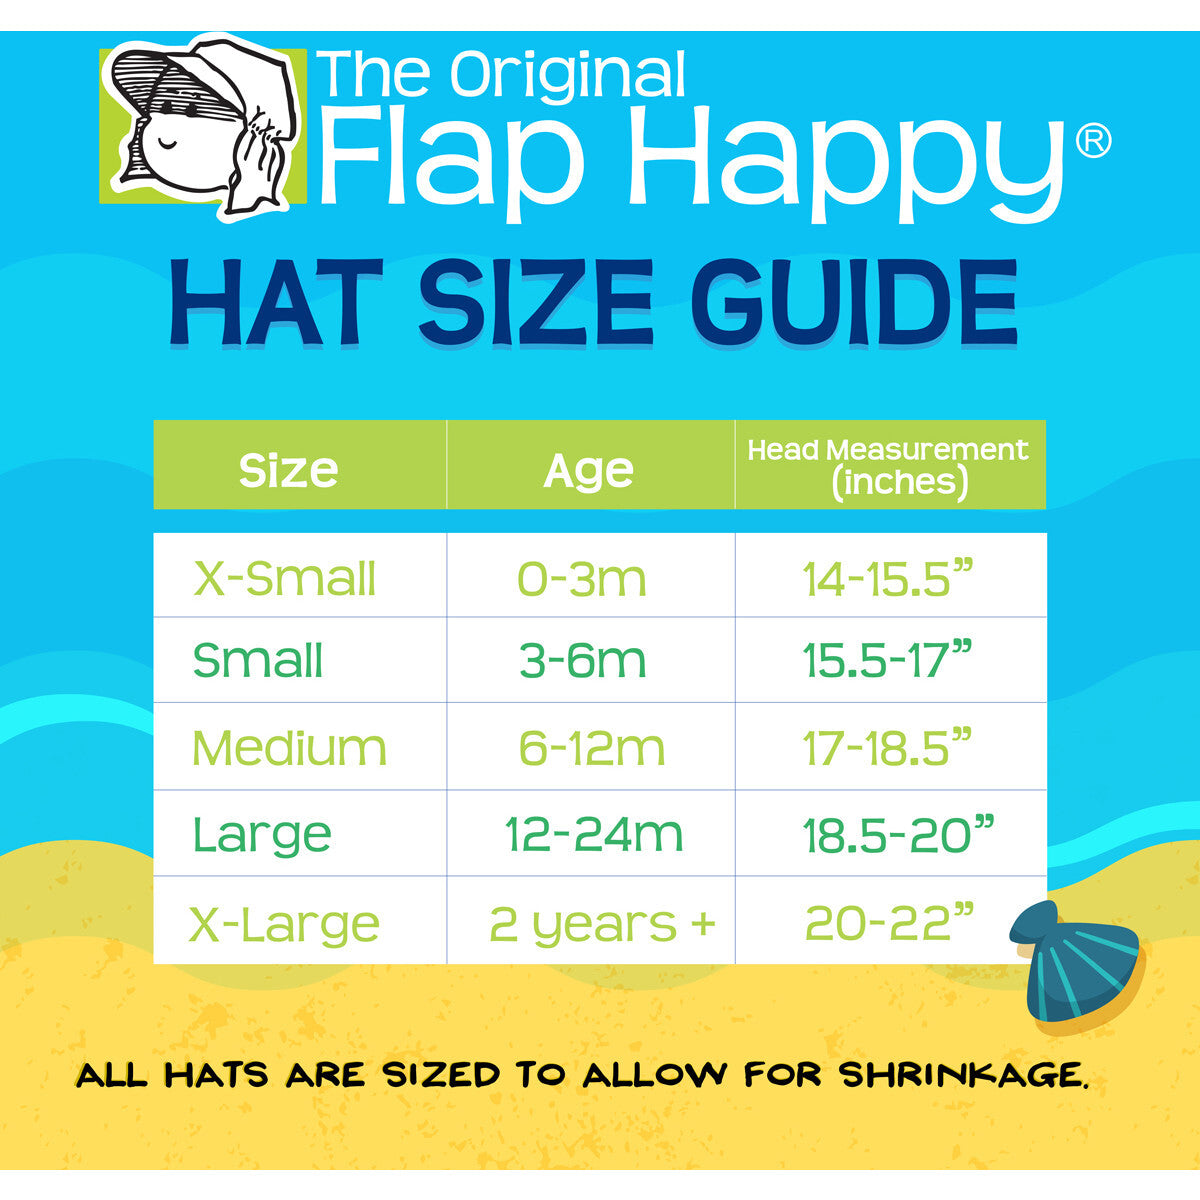 Flap Happy Bucket Hat - Candy Pink